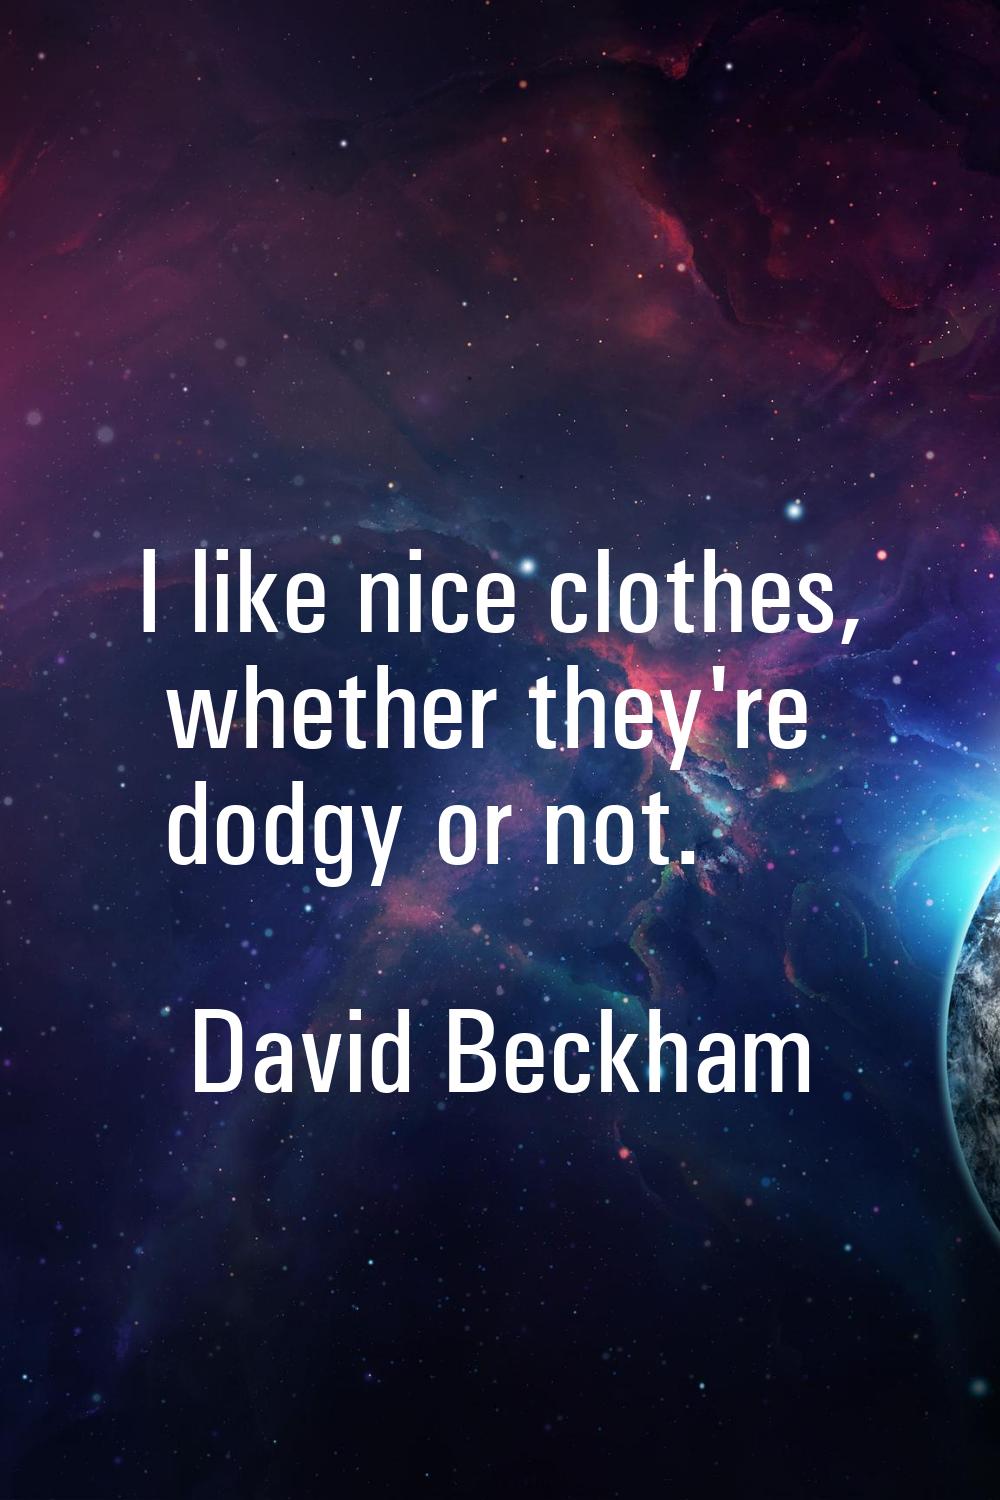 I like nice clothes, whether they're dodgy or not.